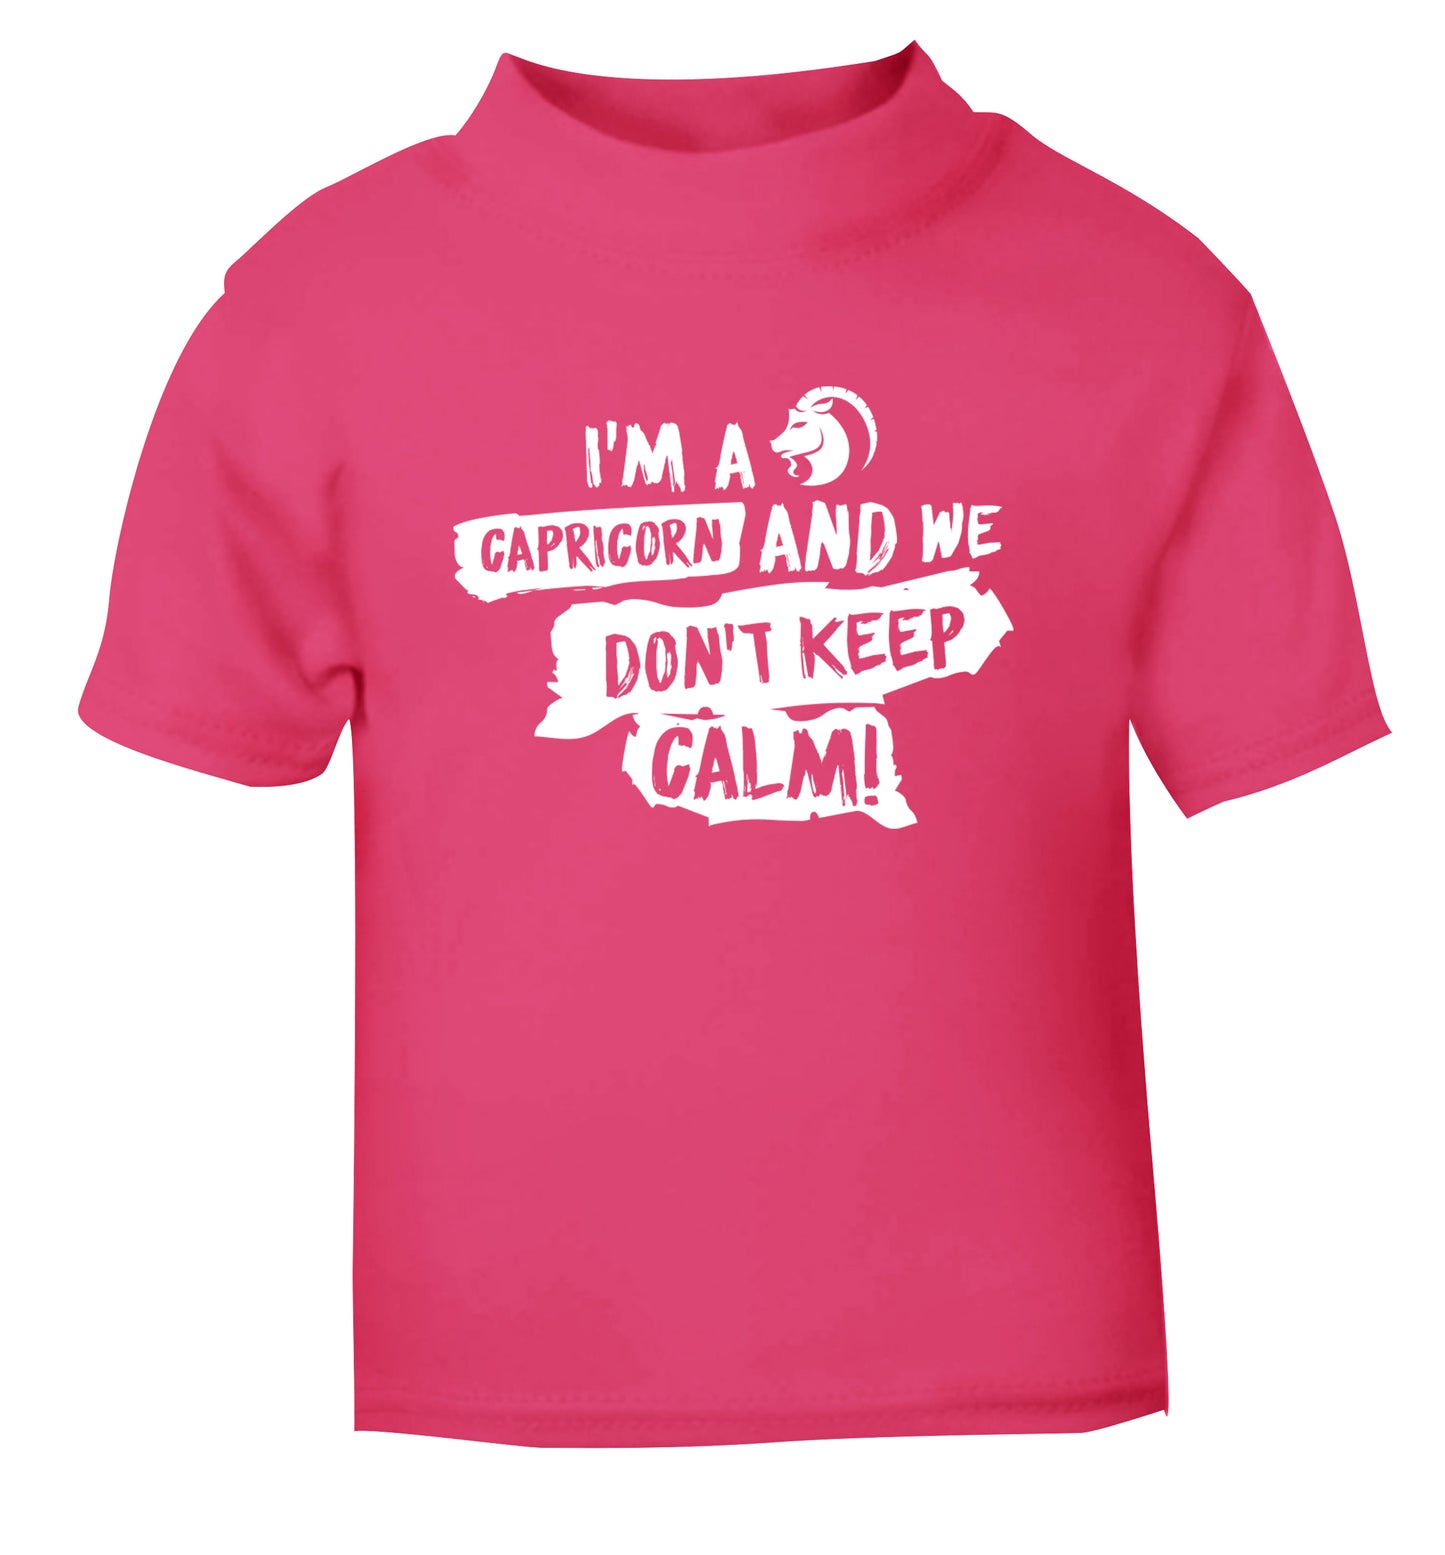 I'm a capricorn and we don't keep calm pink Baby Toddler Tshirt 2 Years